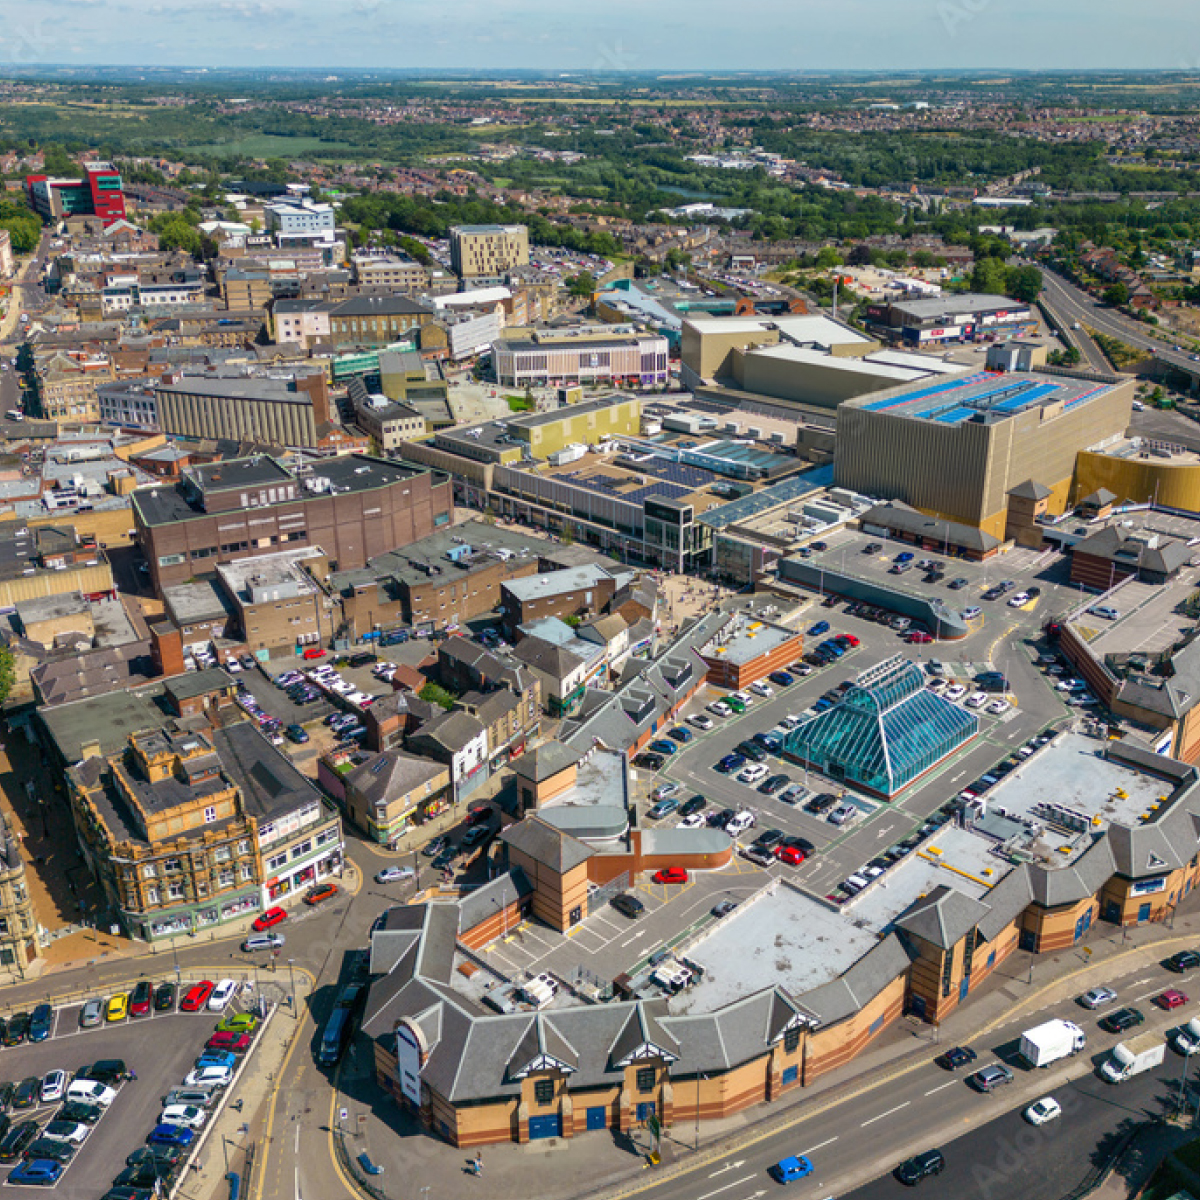 Local Businesses List Cleanliness, Safety and Retail As Their Top Priorities For Improvement in South Yorkshire’s Civic Centres